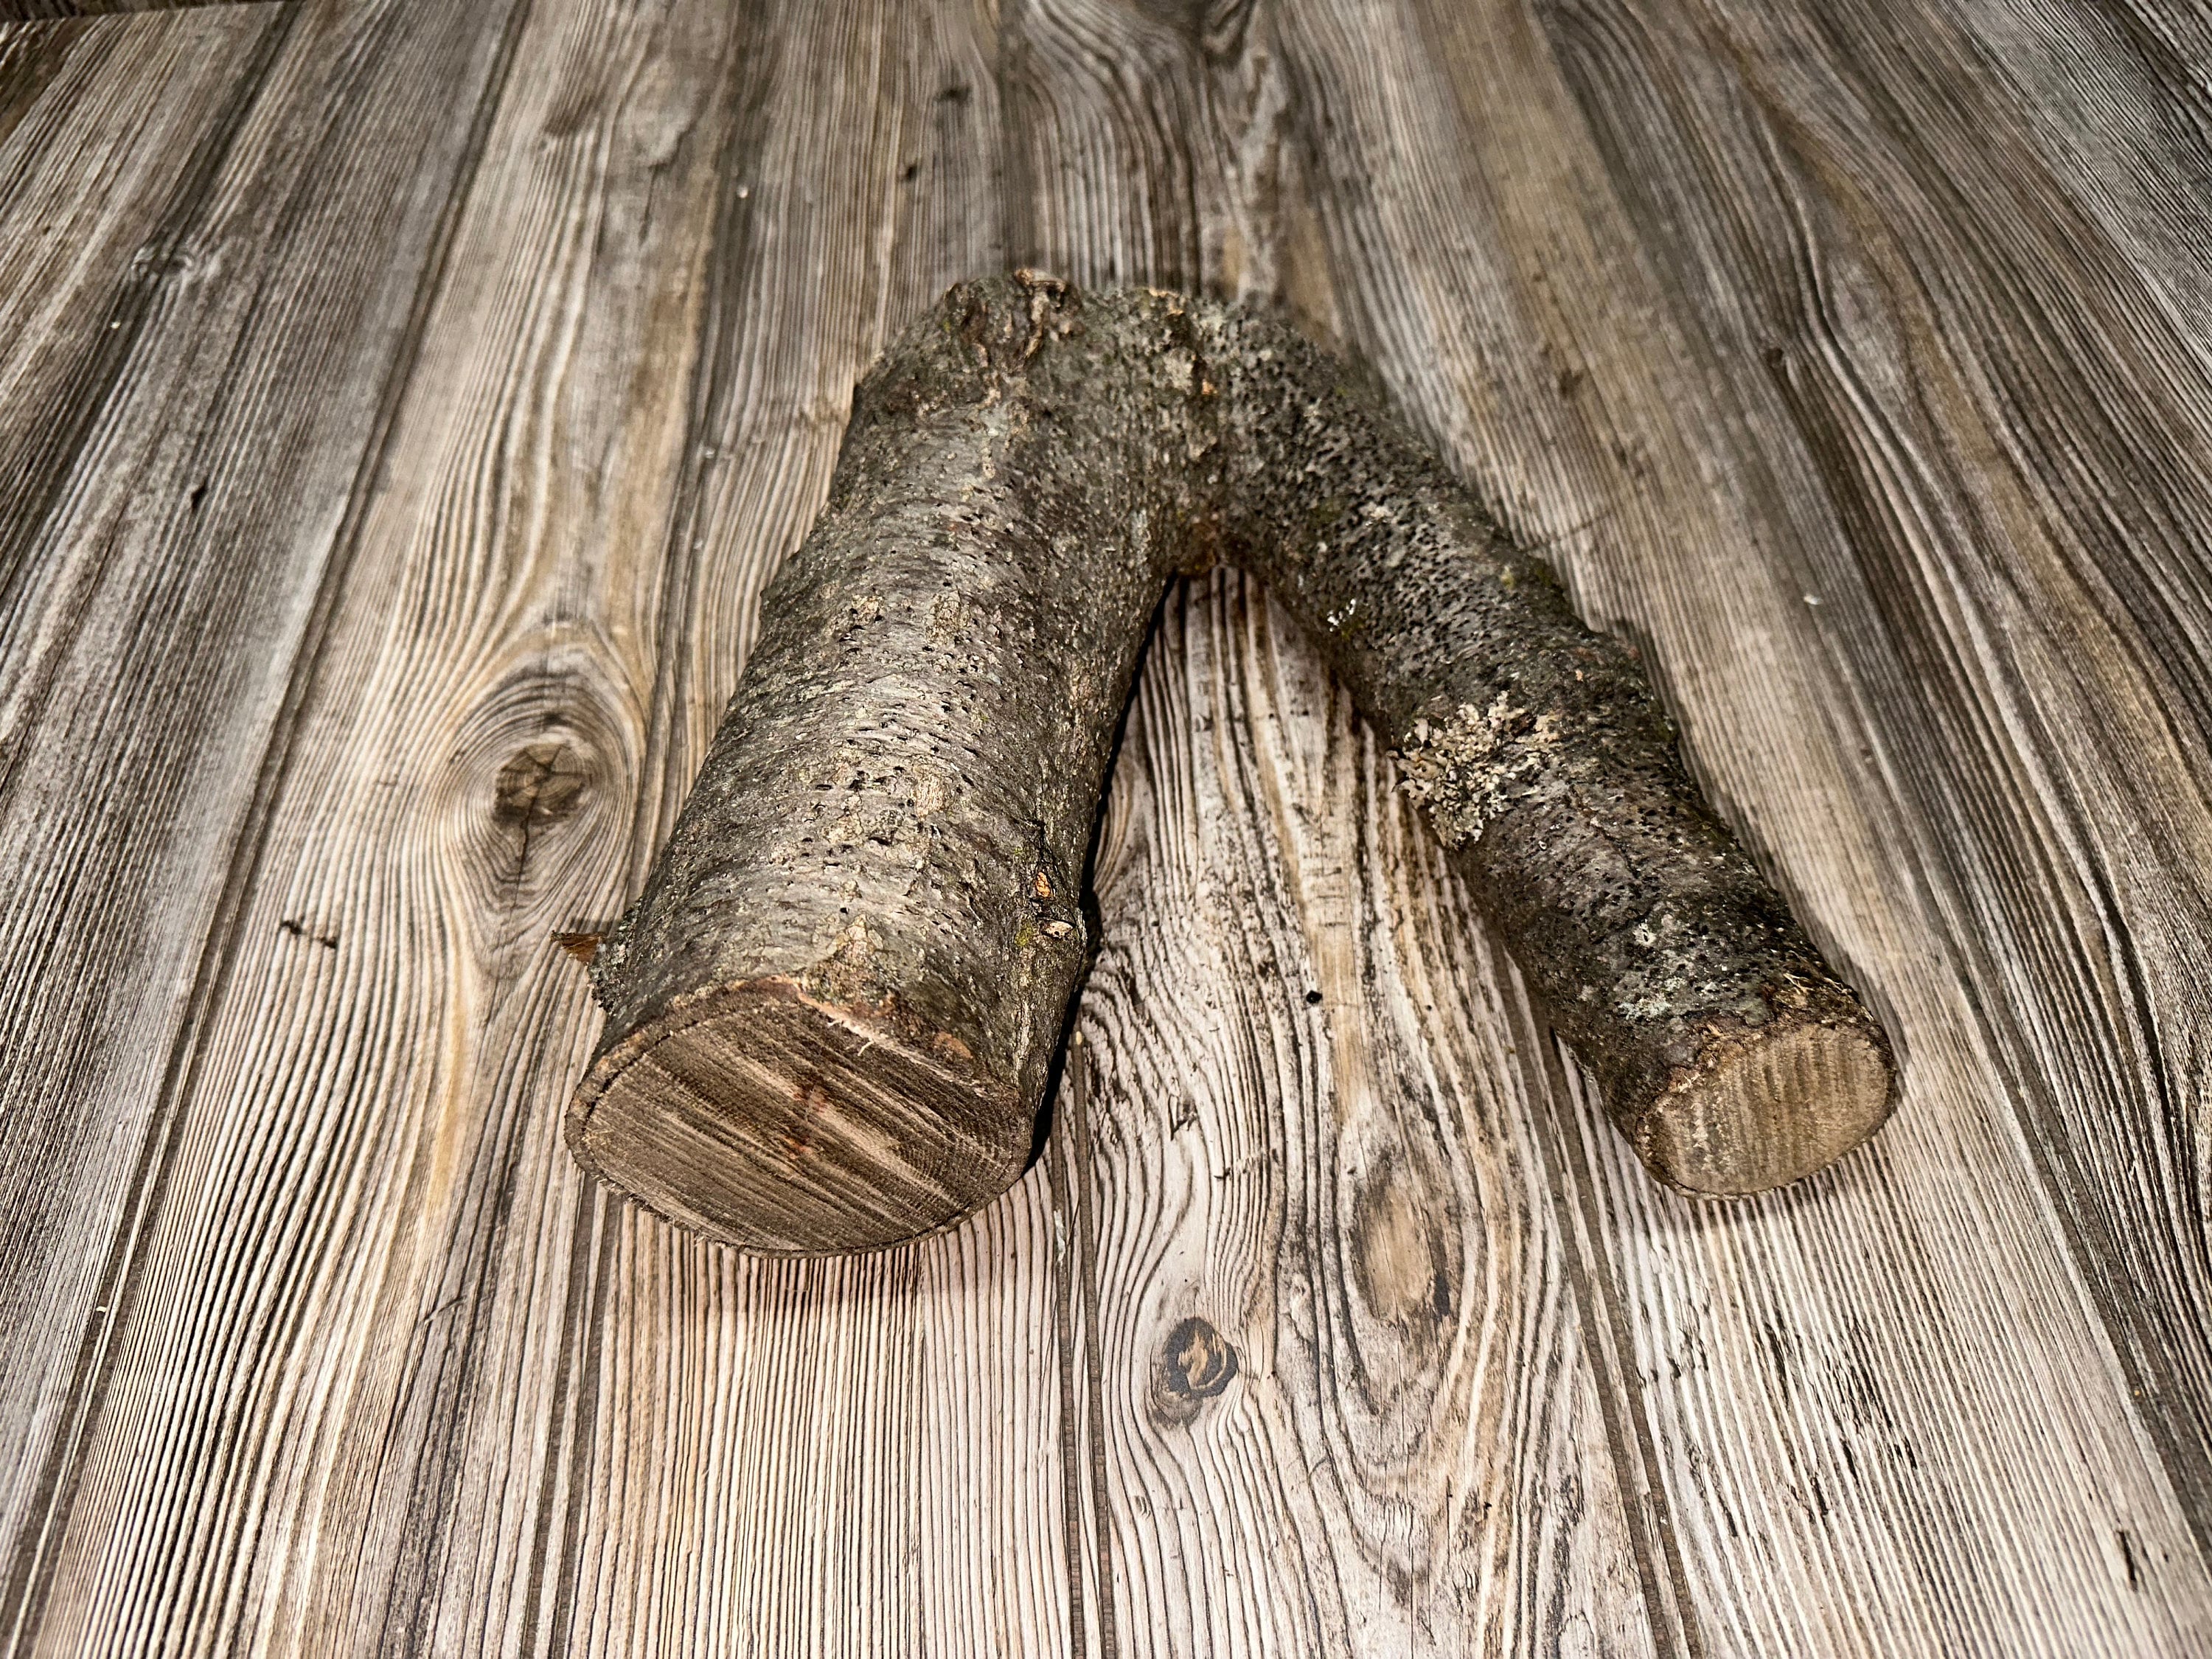 Unique V-Shaped Log, Approximately 10 Inches Long by 8.5 Inches Wide and 3 Inches High